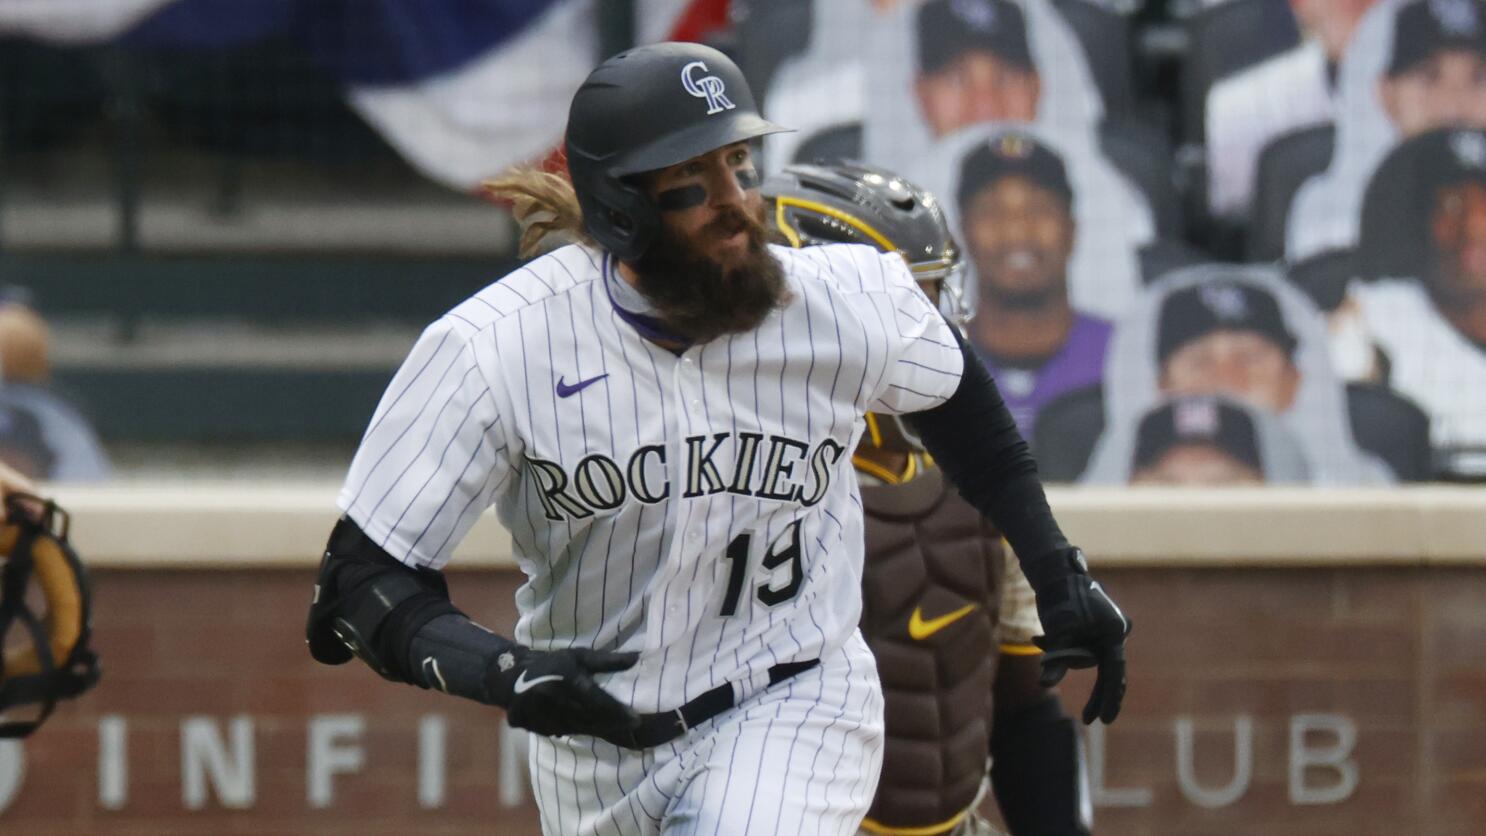 Charlie Blackmon could set a hitting record. Would it be